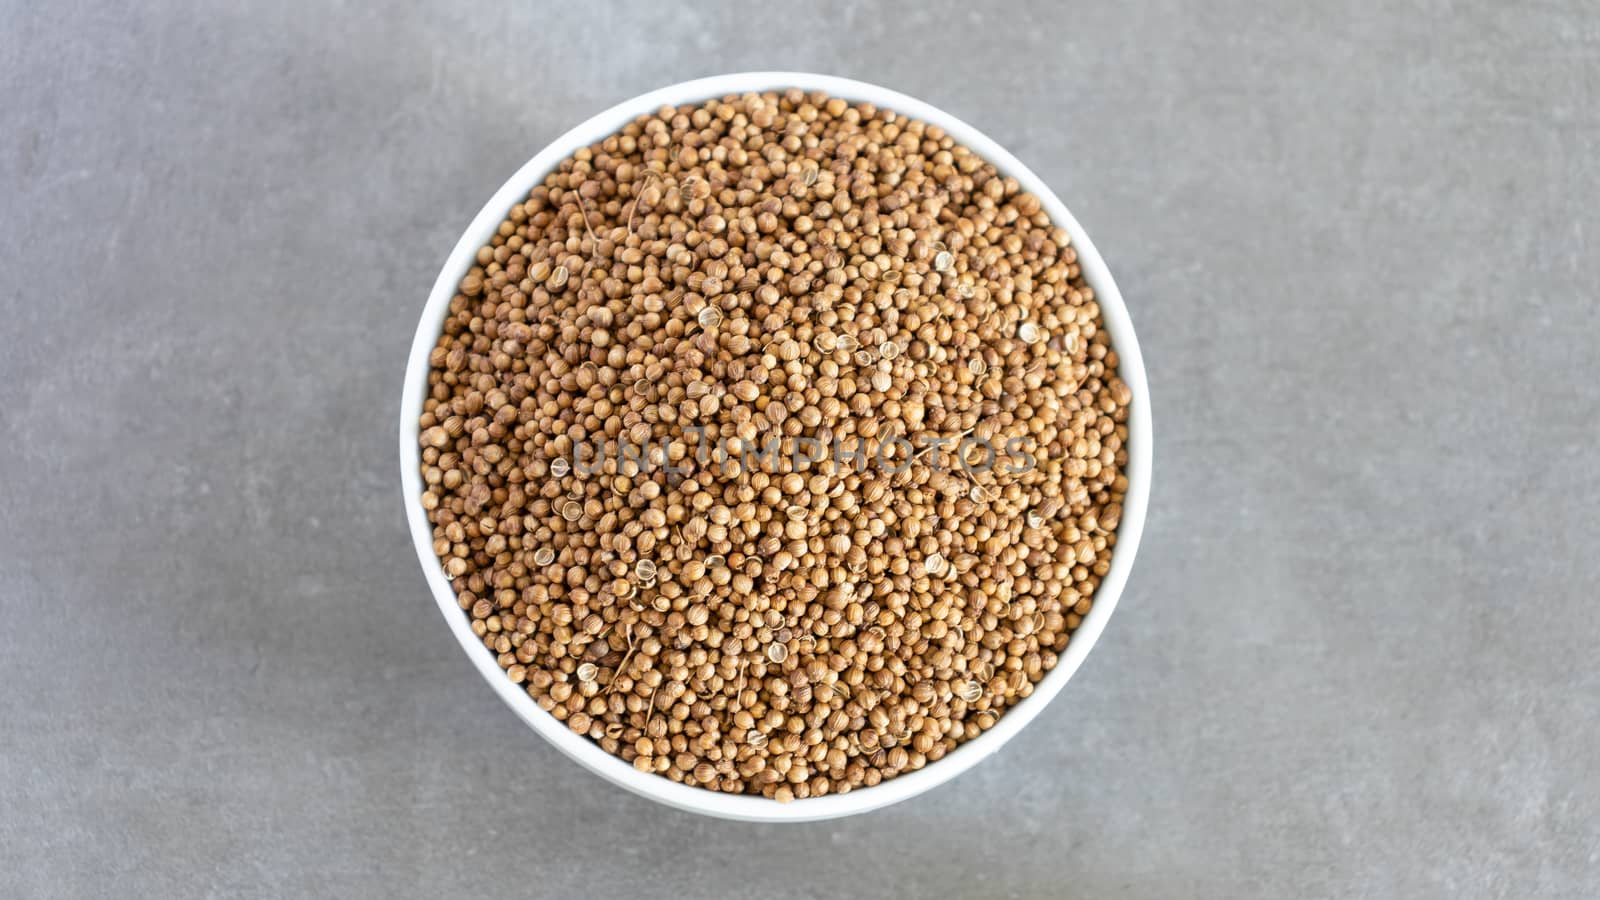 Coriander Seeds Bowl Top View Neutral background with negative space to add captions